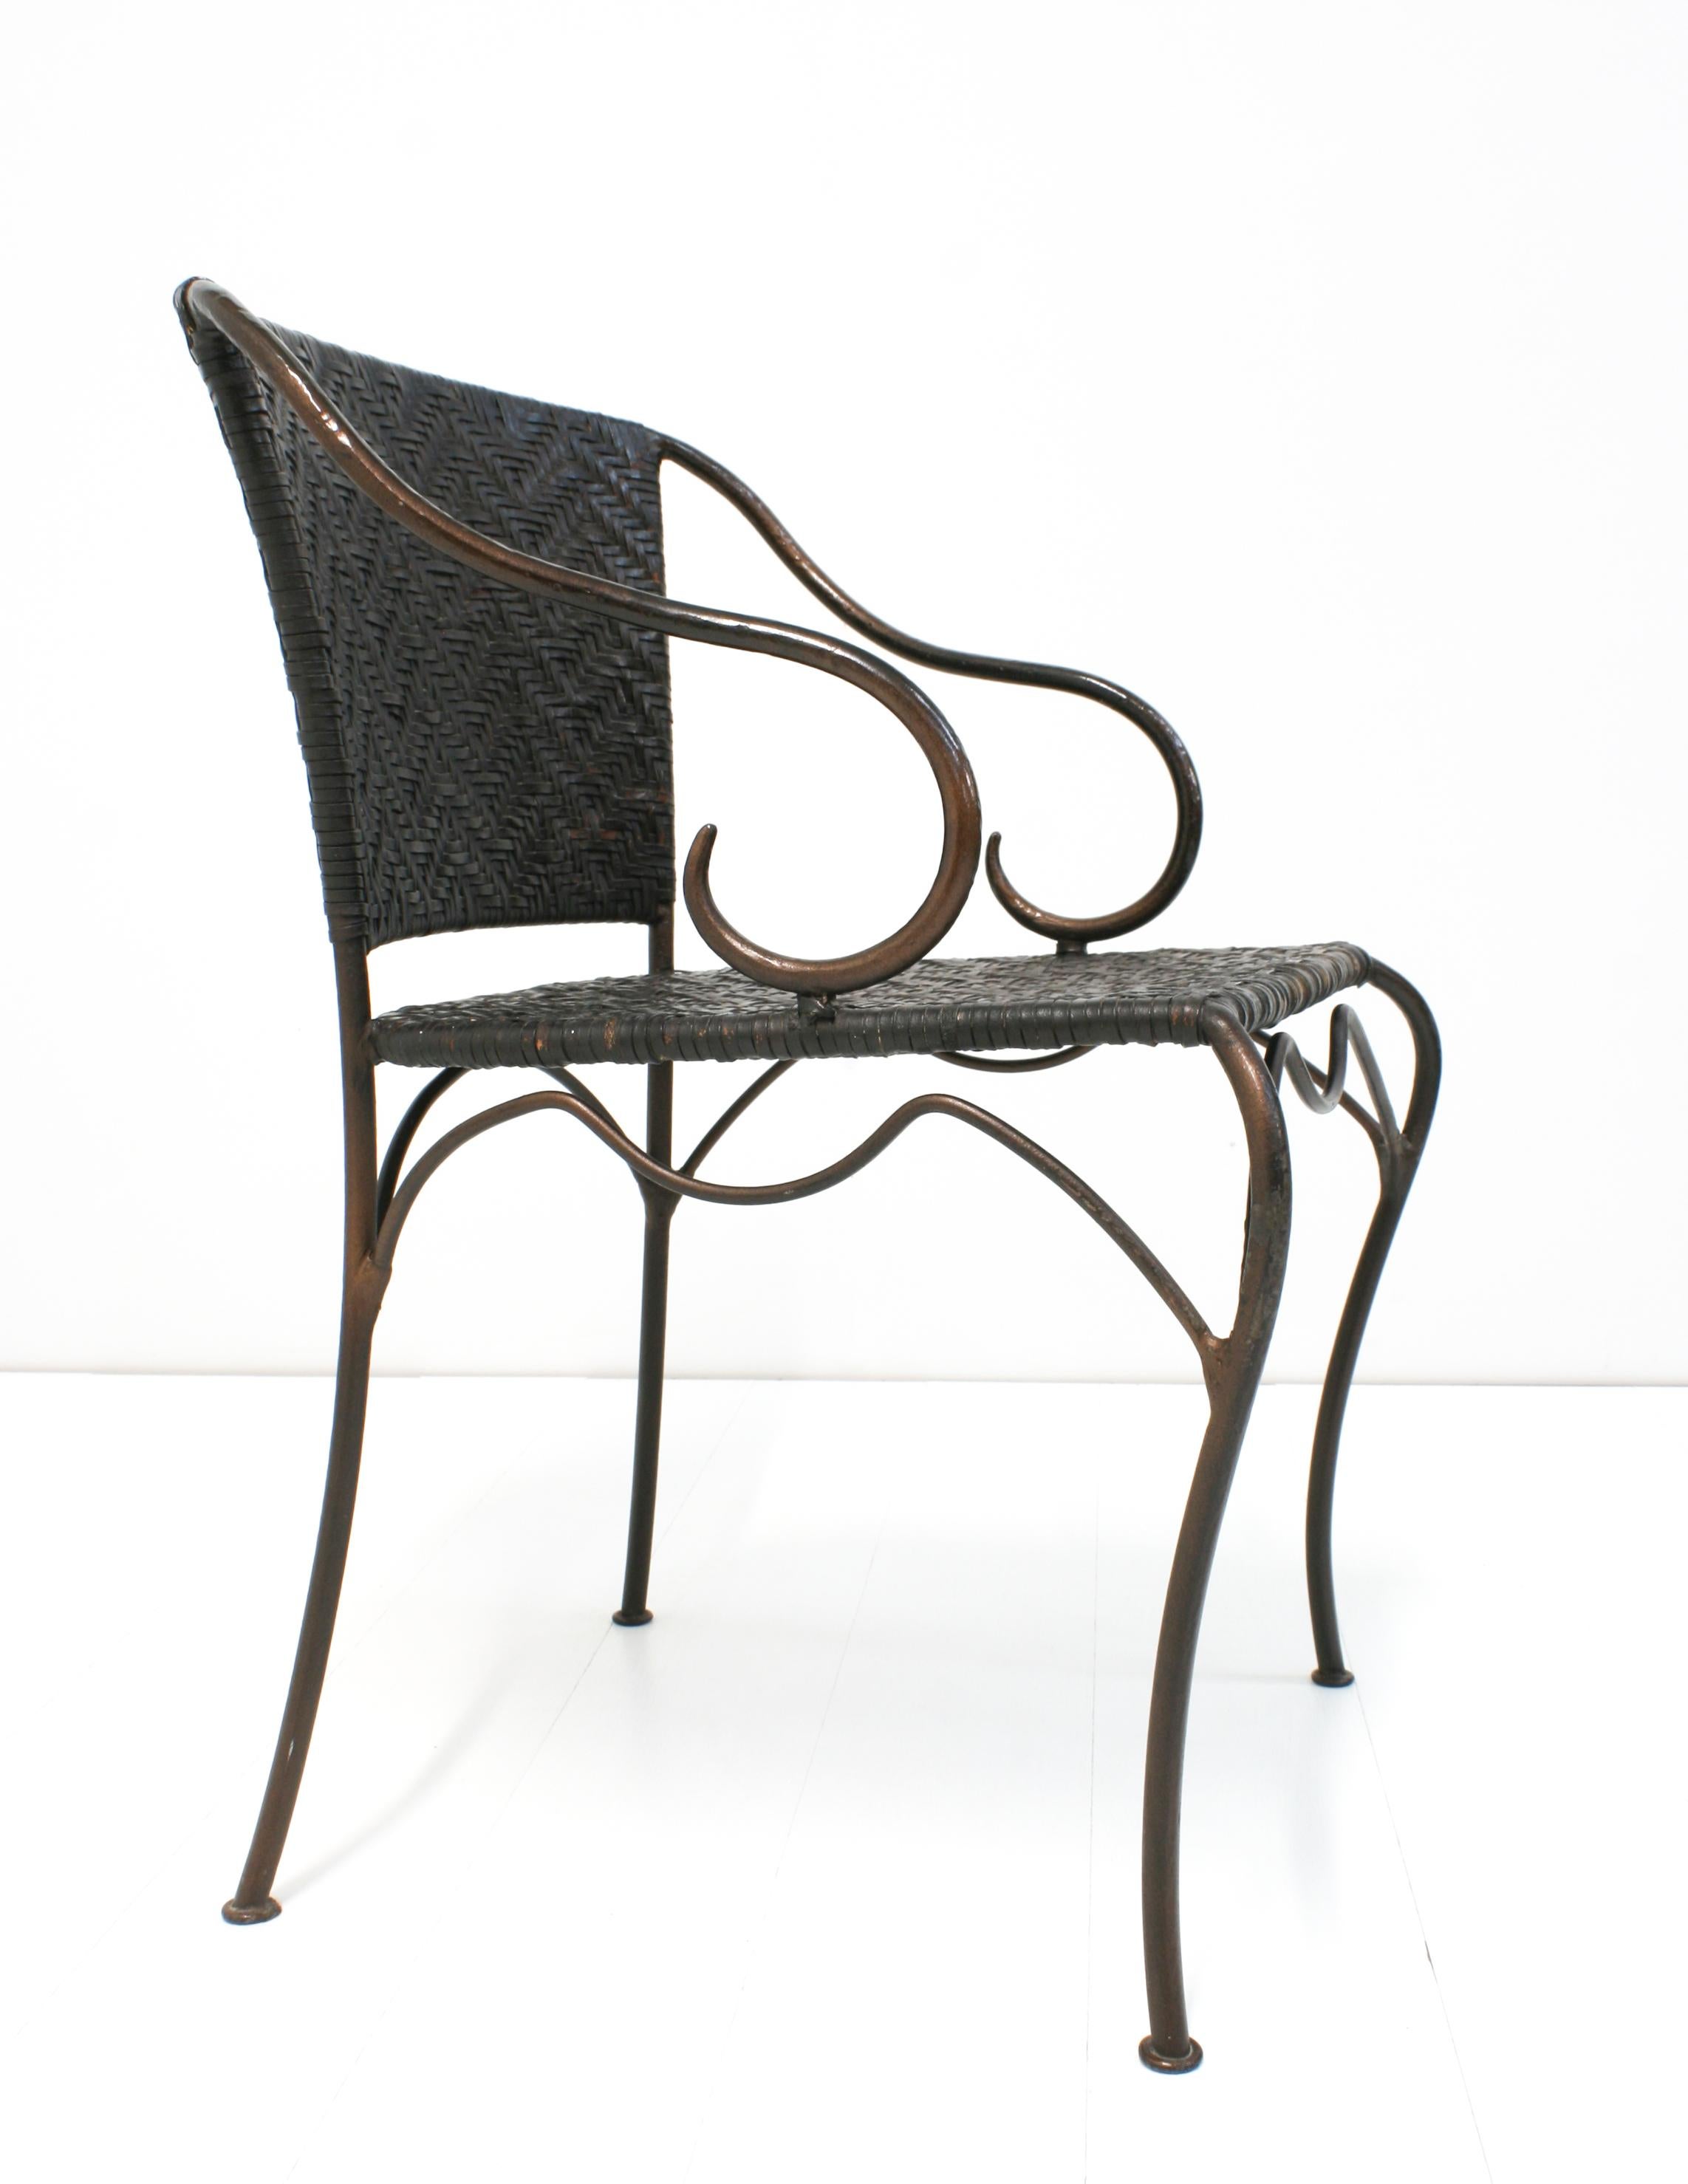 8x Wrought Iron & Leather Anatol Dining Armchairs by Gunther Lambert, 1990s For Sale 11